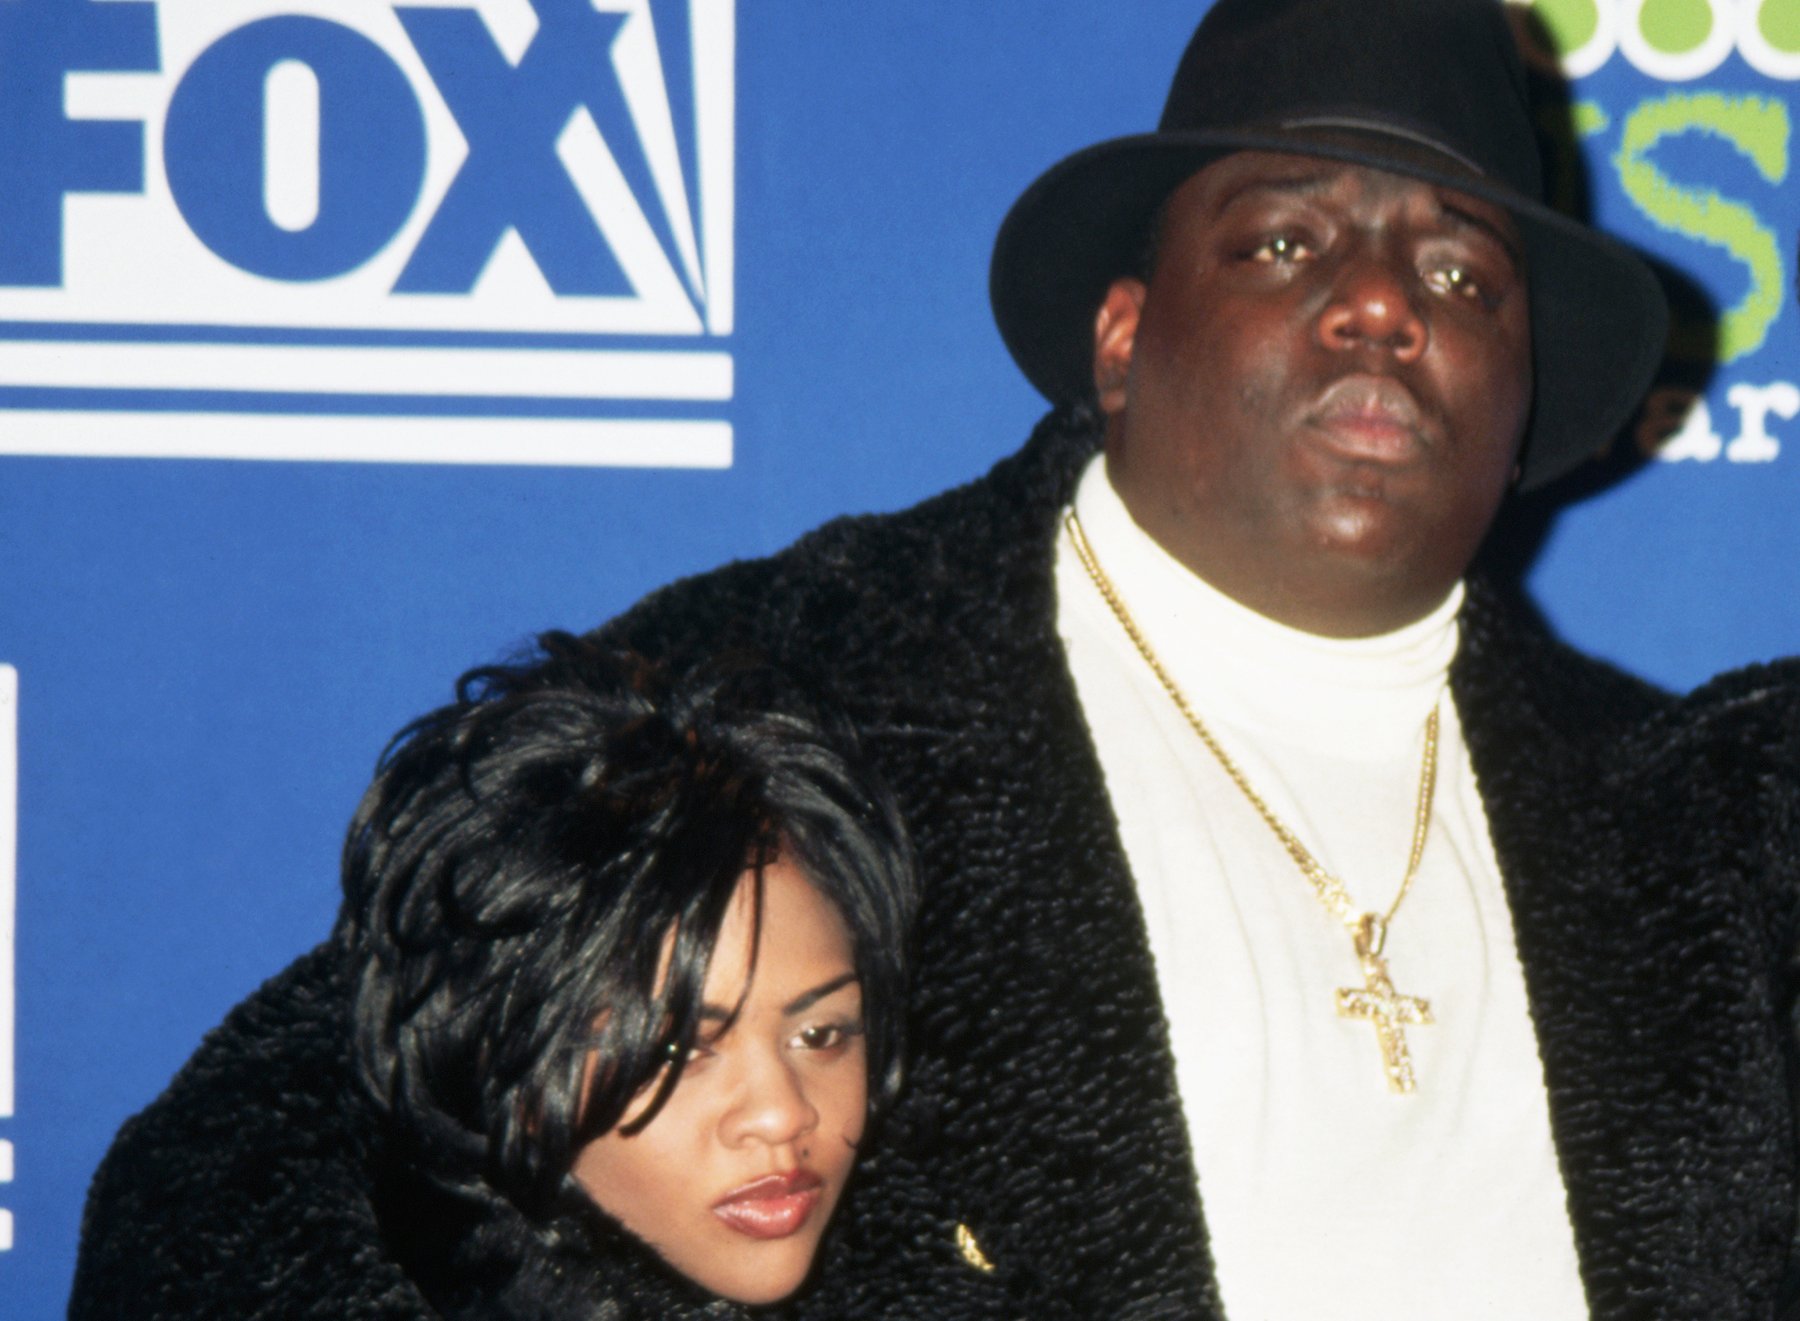 Lil' Kim and The Notorious B.I.G. posing together